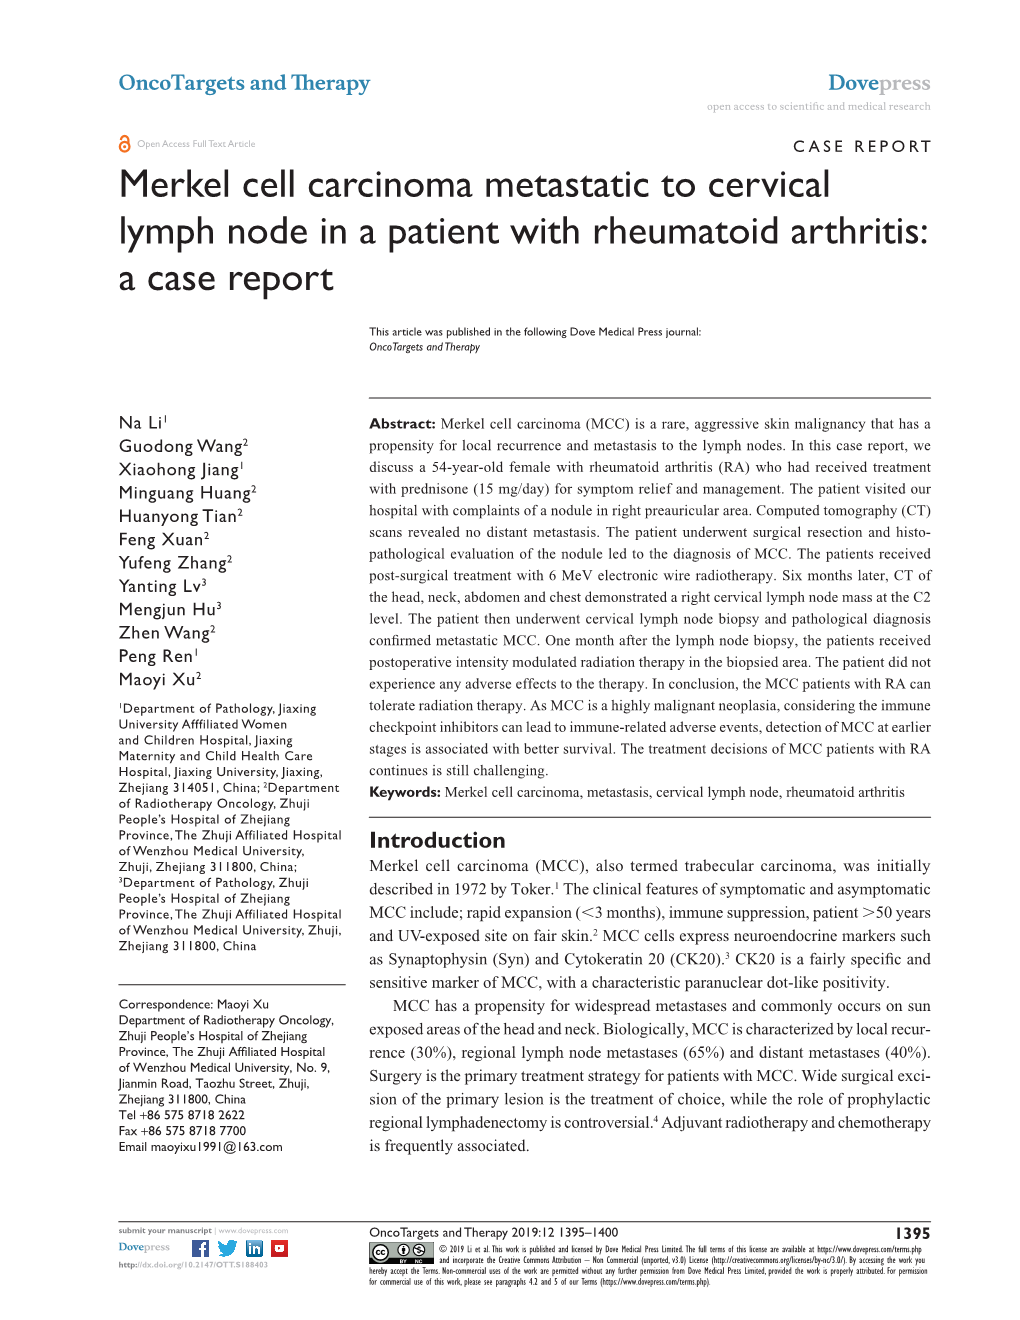 Merkel Cell Carcinoma Metastatic to Cervical Lymph Node in a Patient with Rheumatoid Arthritis: a Case Report